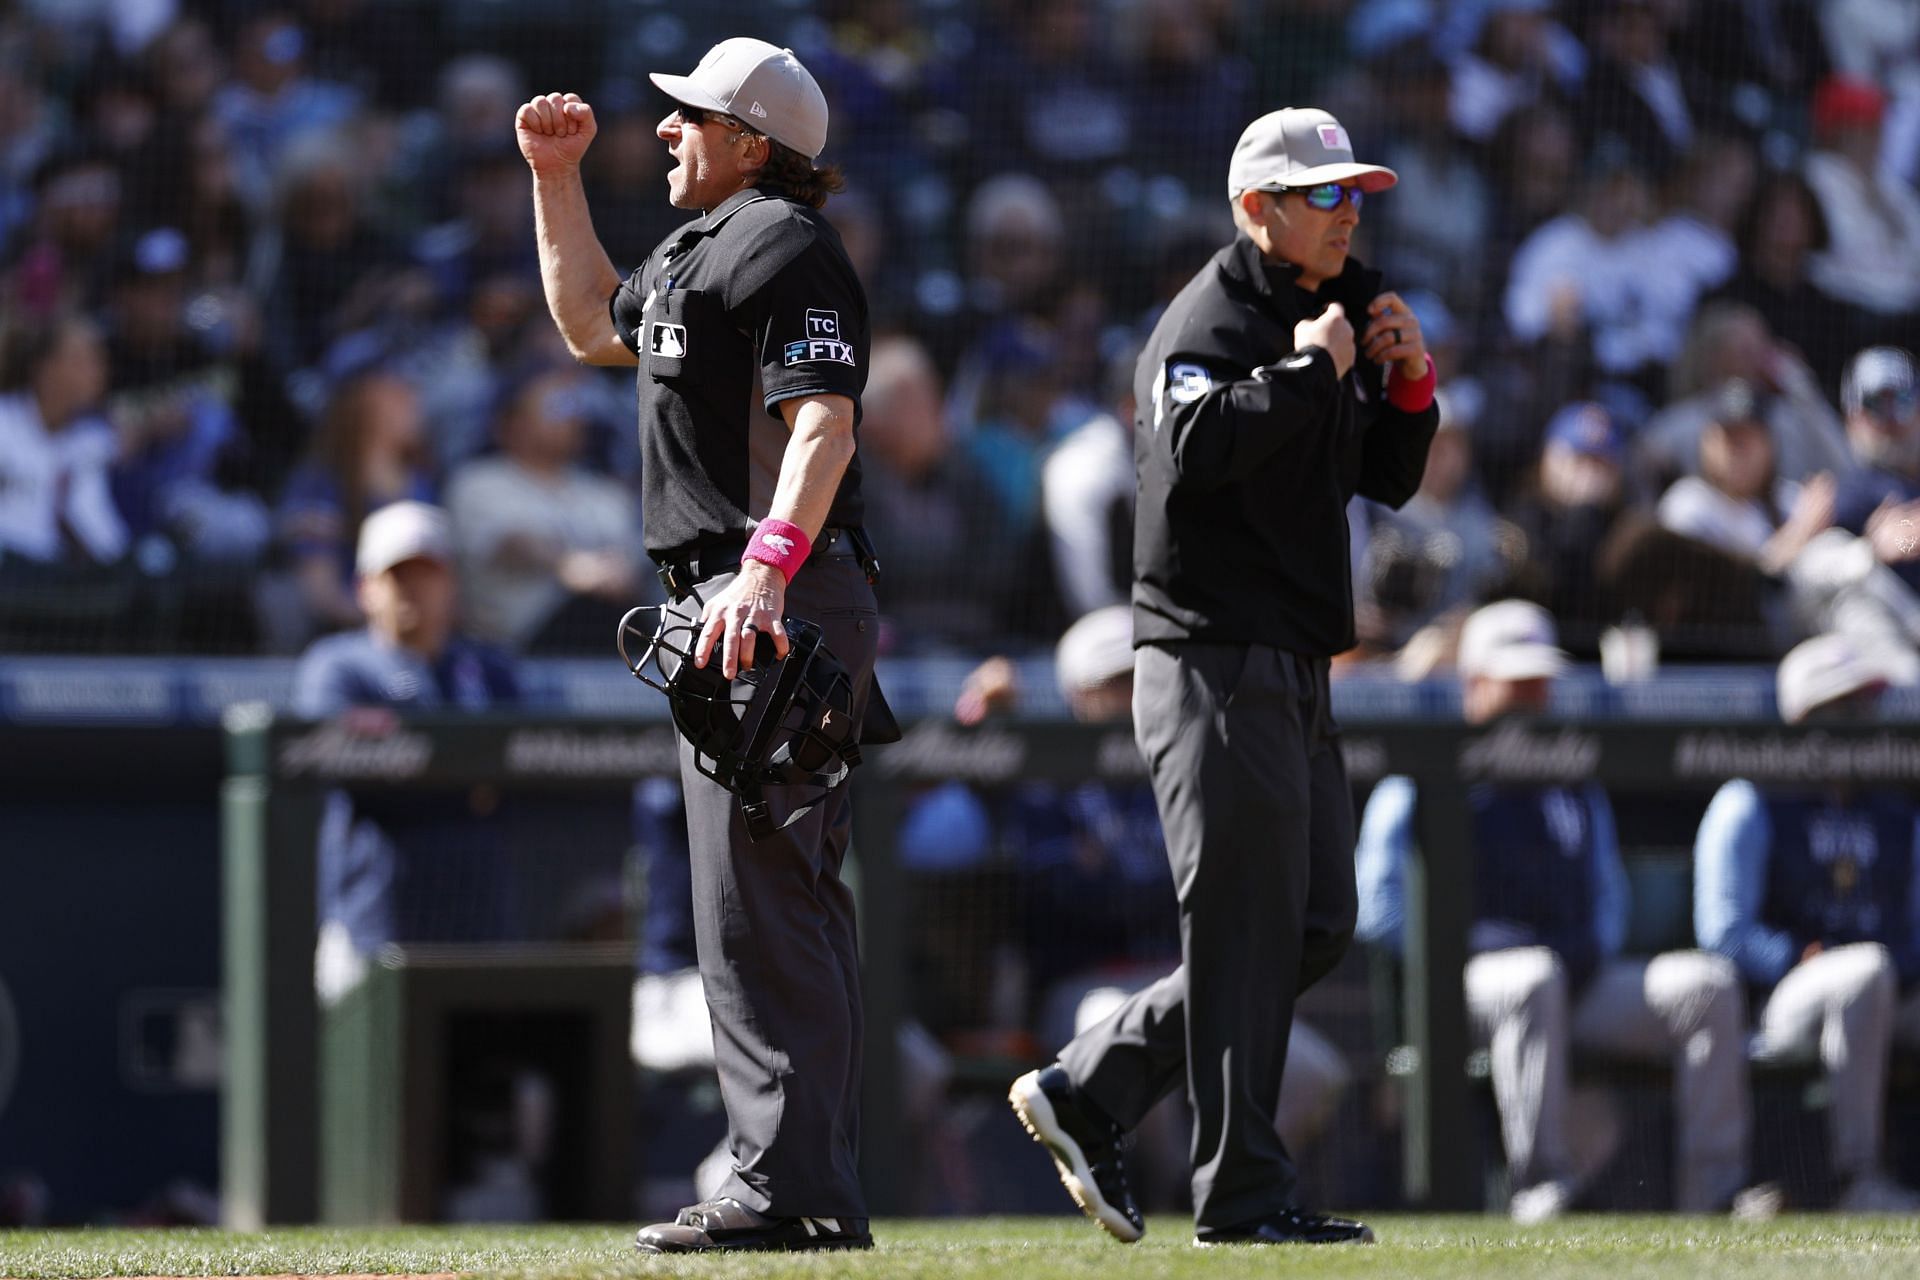 The new changes to the MLB replay rule could potentially lead to game-deciding mistakes